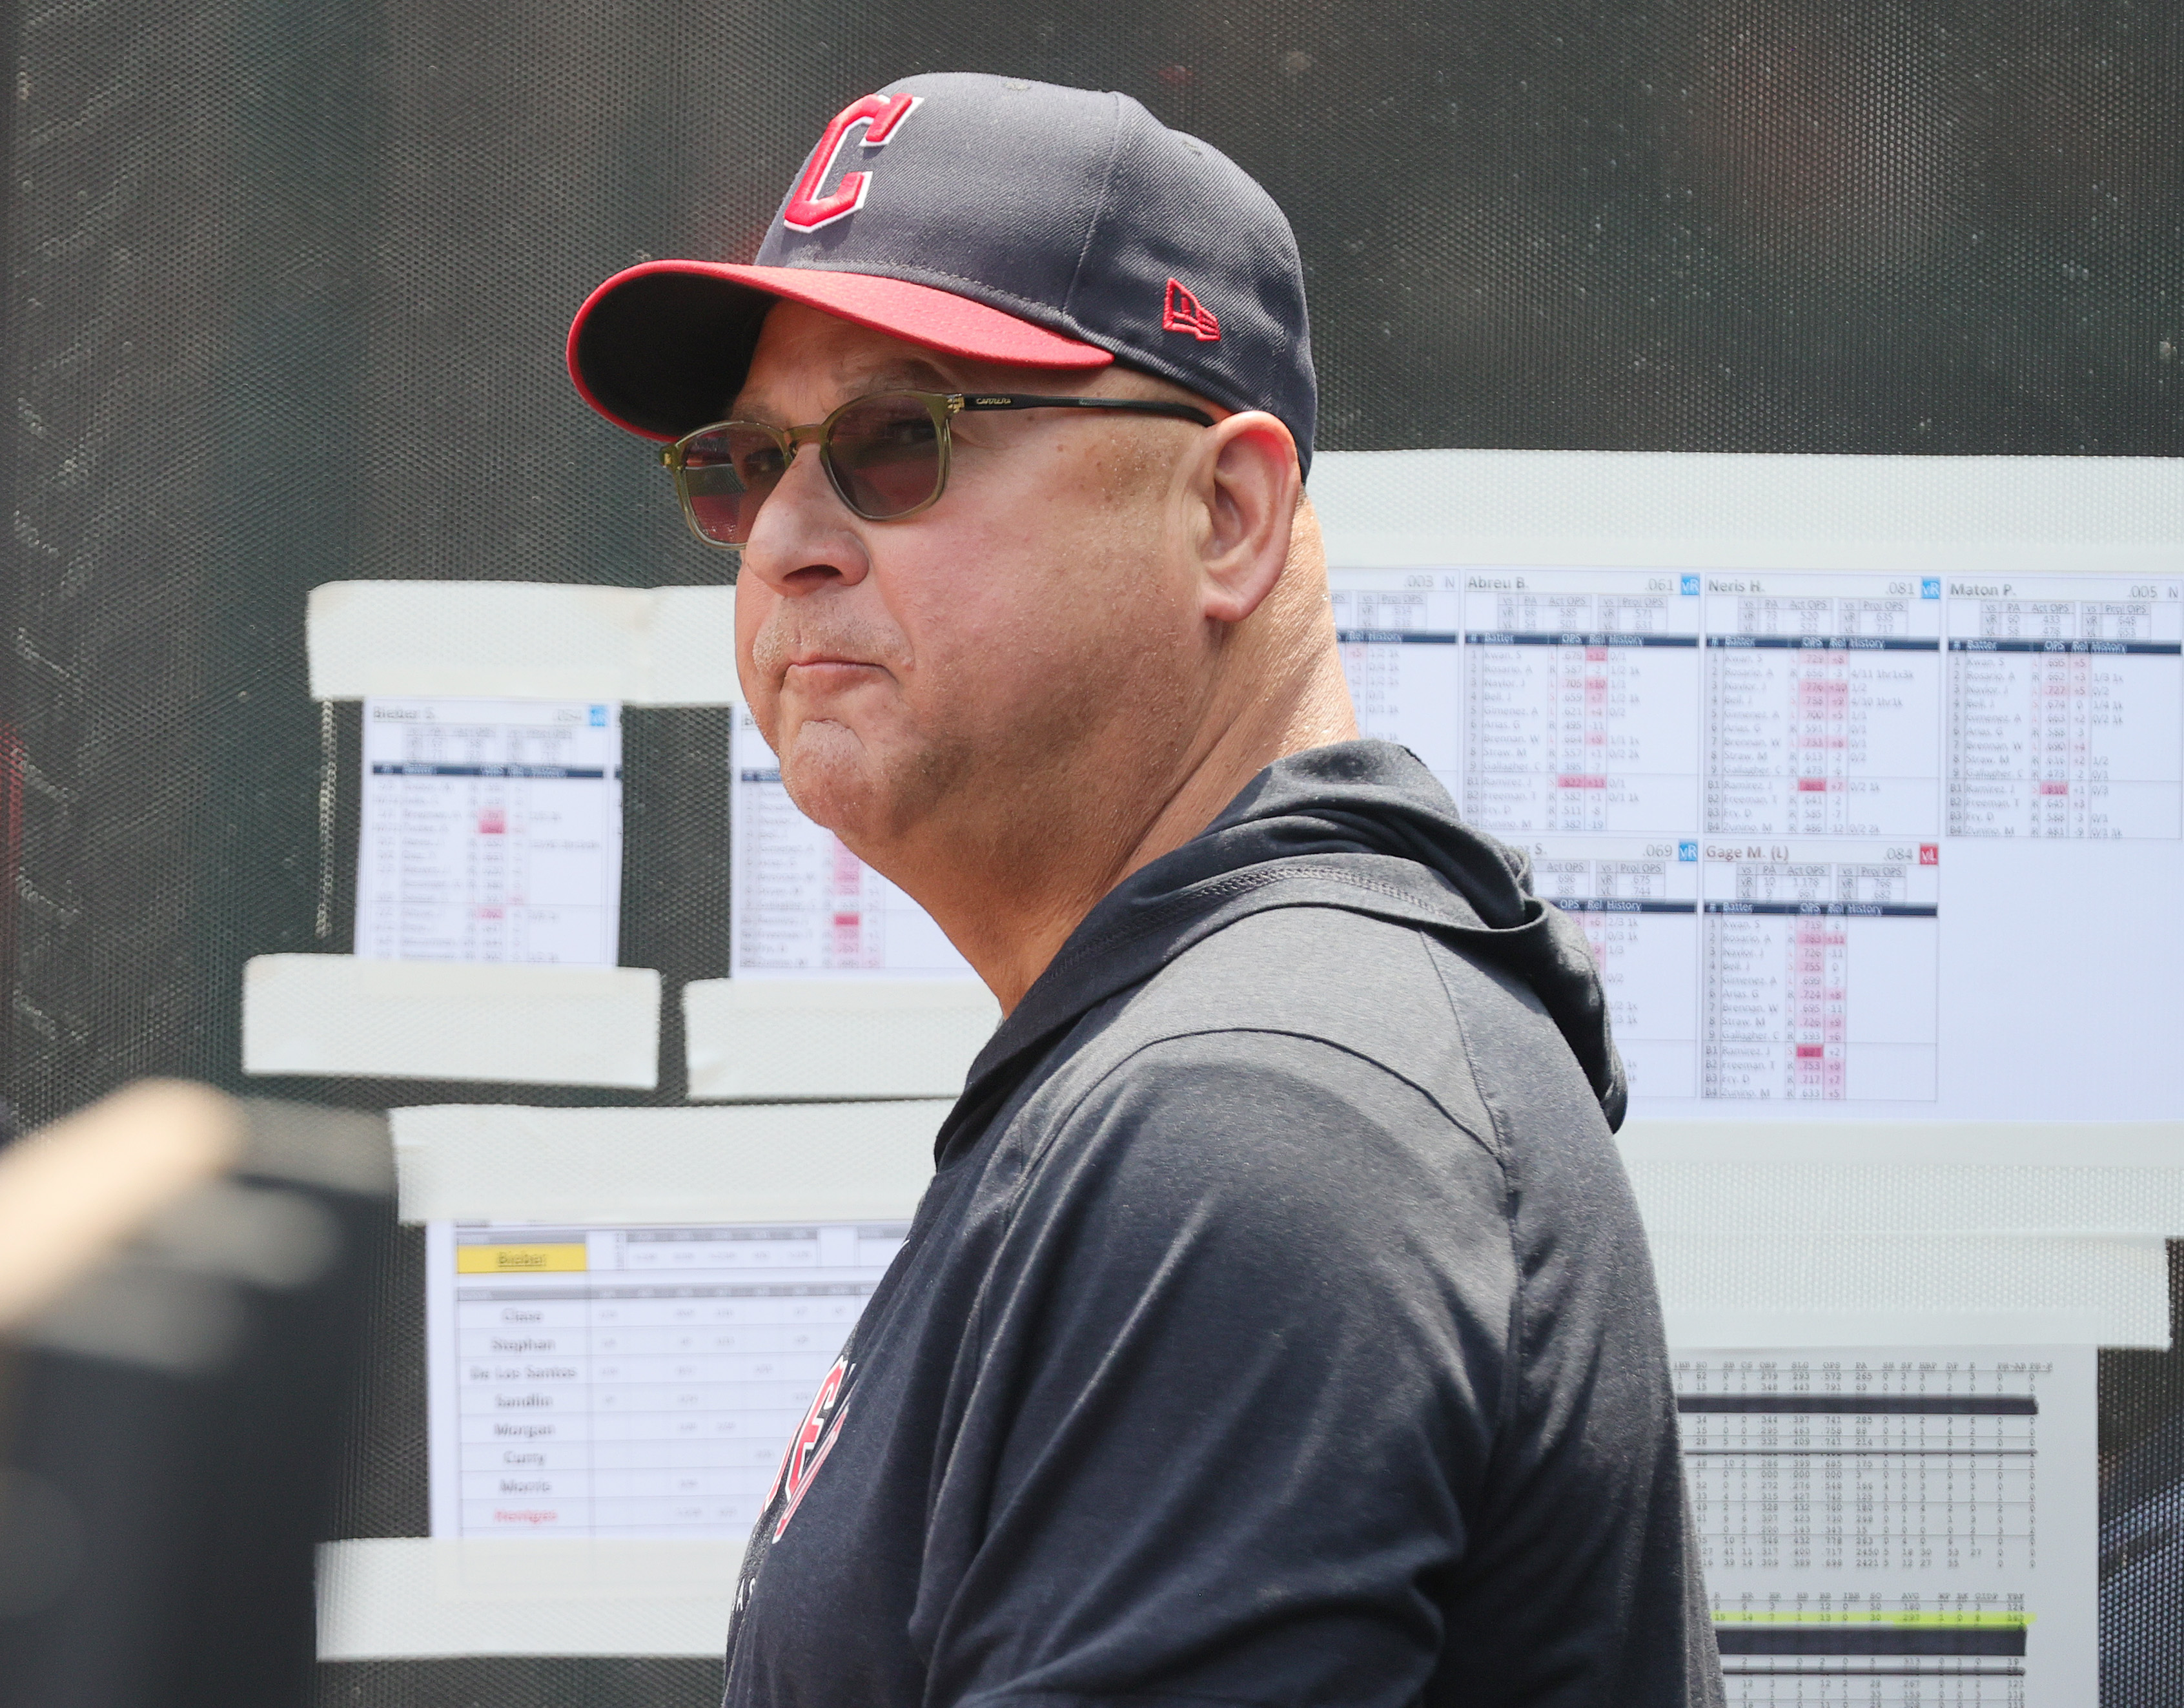 Guardians manager Terry Francona out of hospital, advised to rest after  becoming ill before game